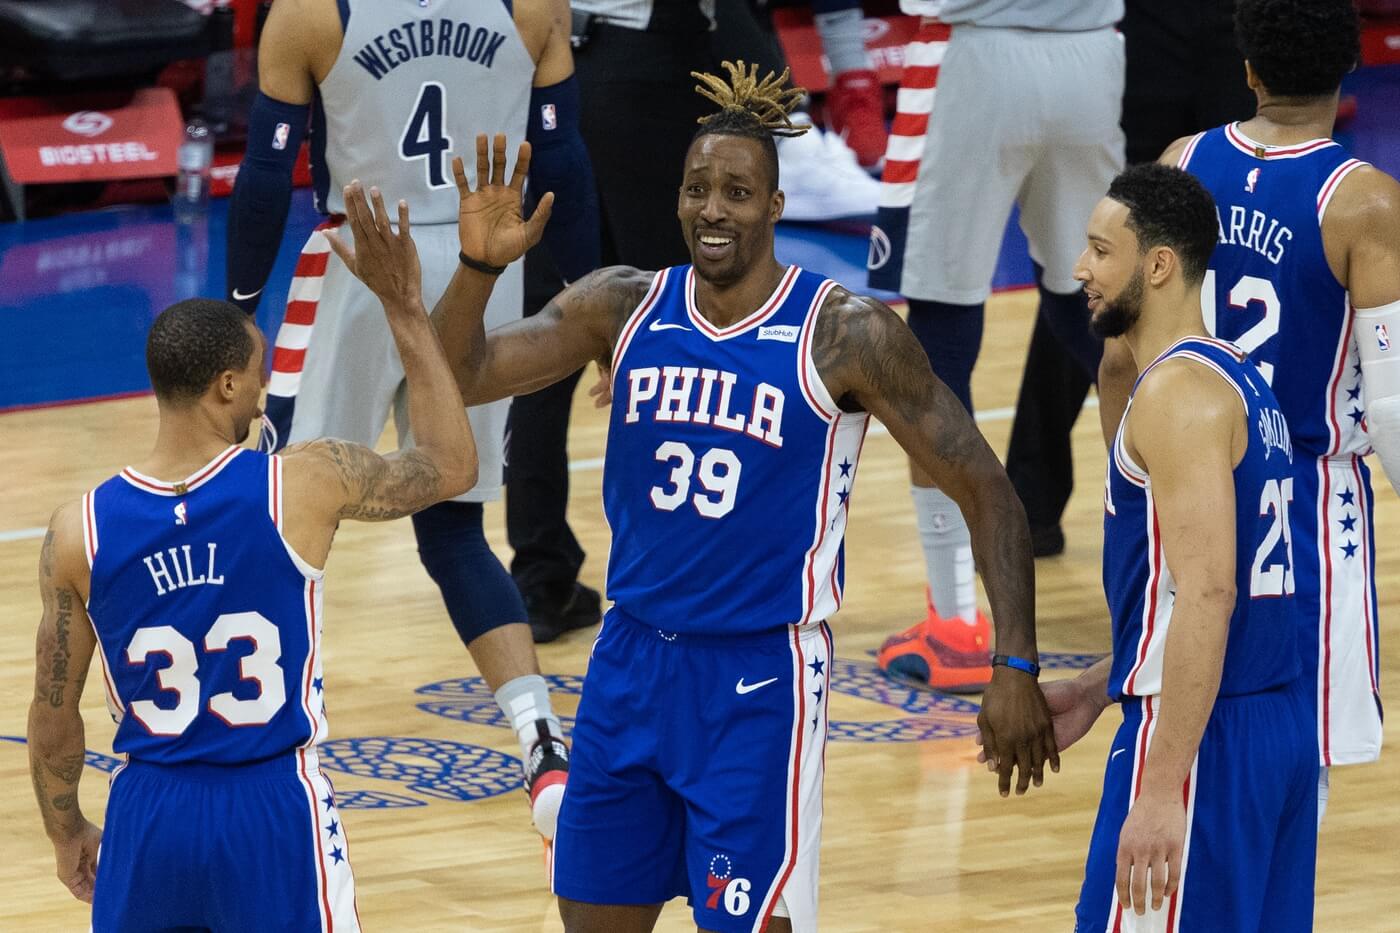 Jun 2, 2021; Philadelphia, Pennsylvania, USA; Philadelphia 76ers center Dwight Howard (39) celebrates with guards George Hill (33) and Ben Simmons (25) during the third quarter against the Washington Wizards in game five of the first round of the 2021 NBA Playoffs at Wells Fargo Center. Mandatory Credit: Bill Streicher-USA TODAY Sports